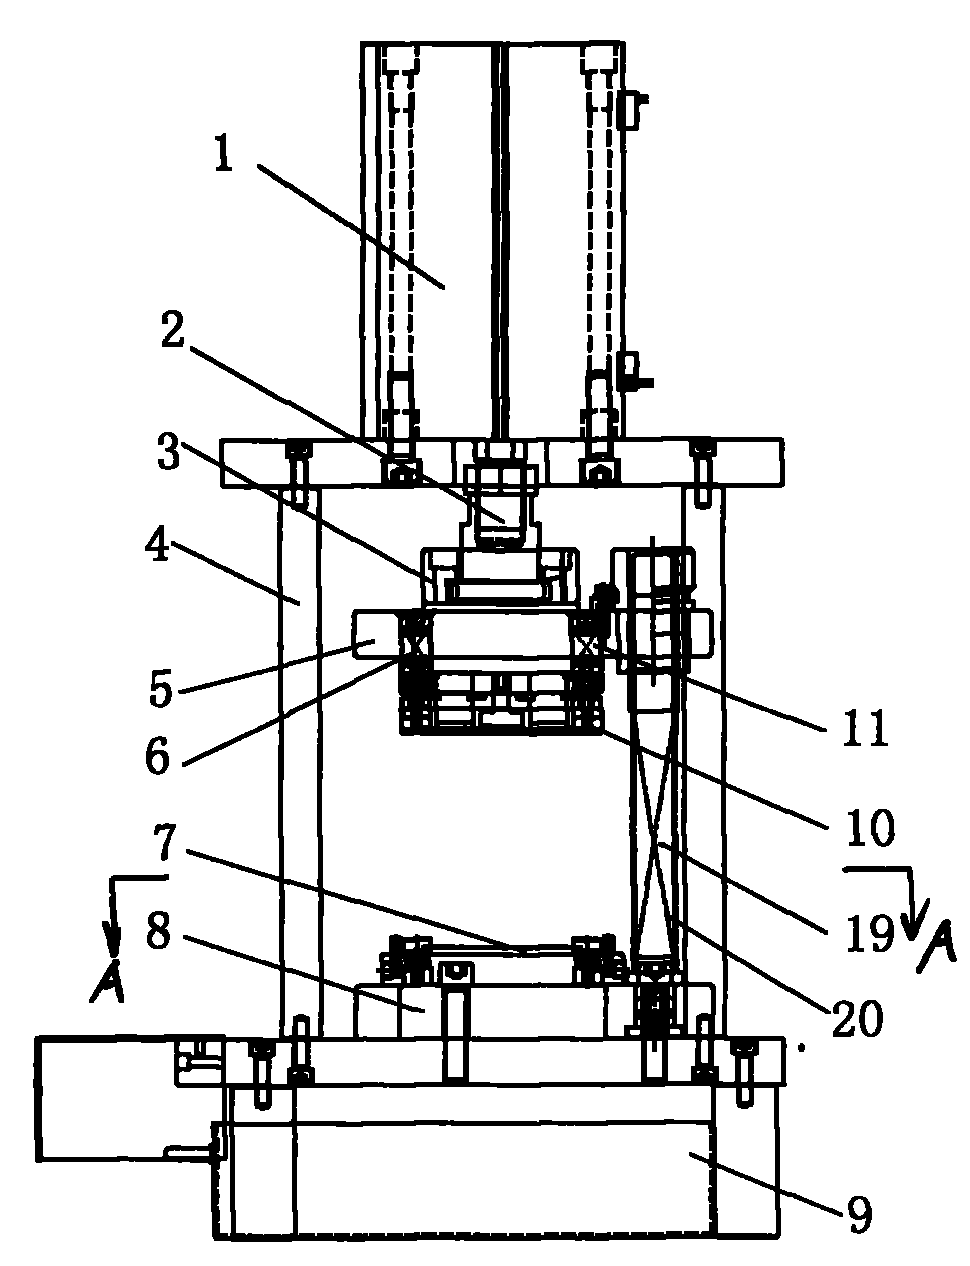 Device for separating lead frame from flow channel